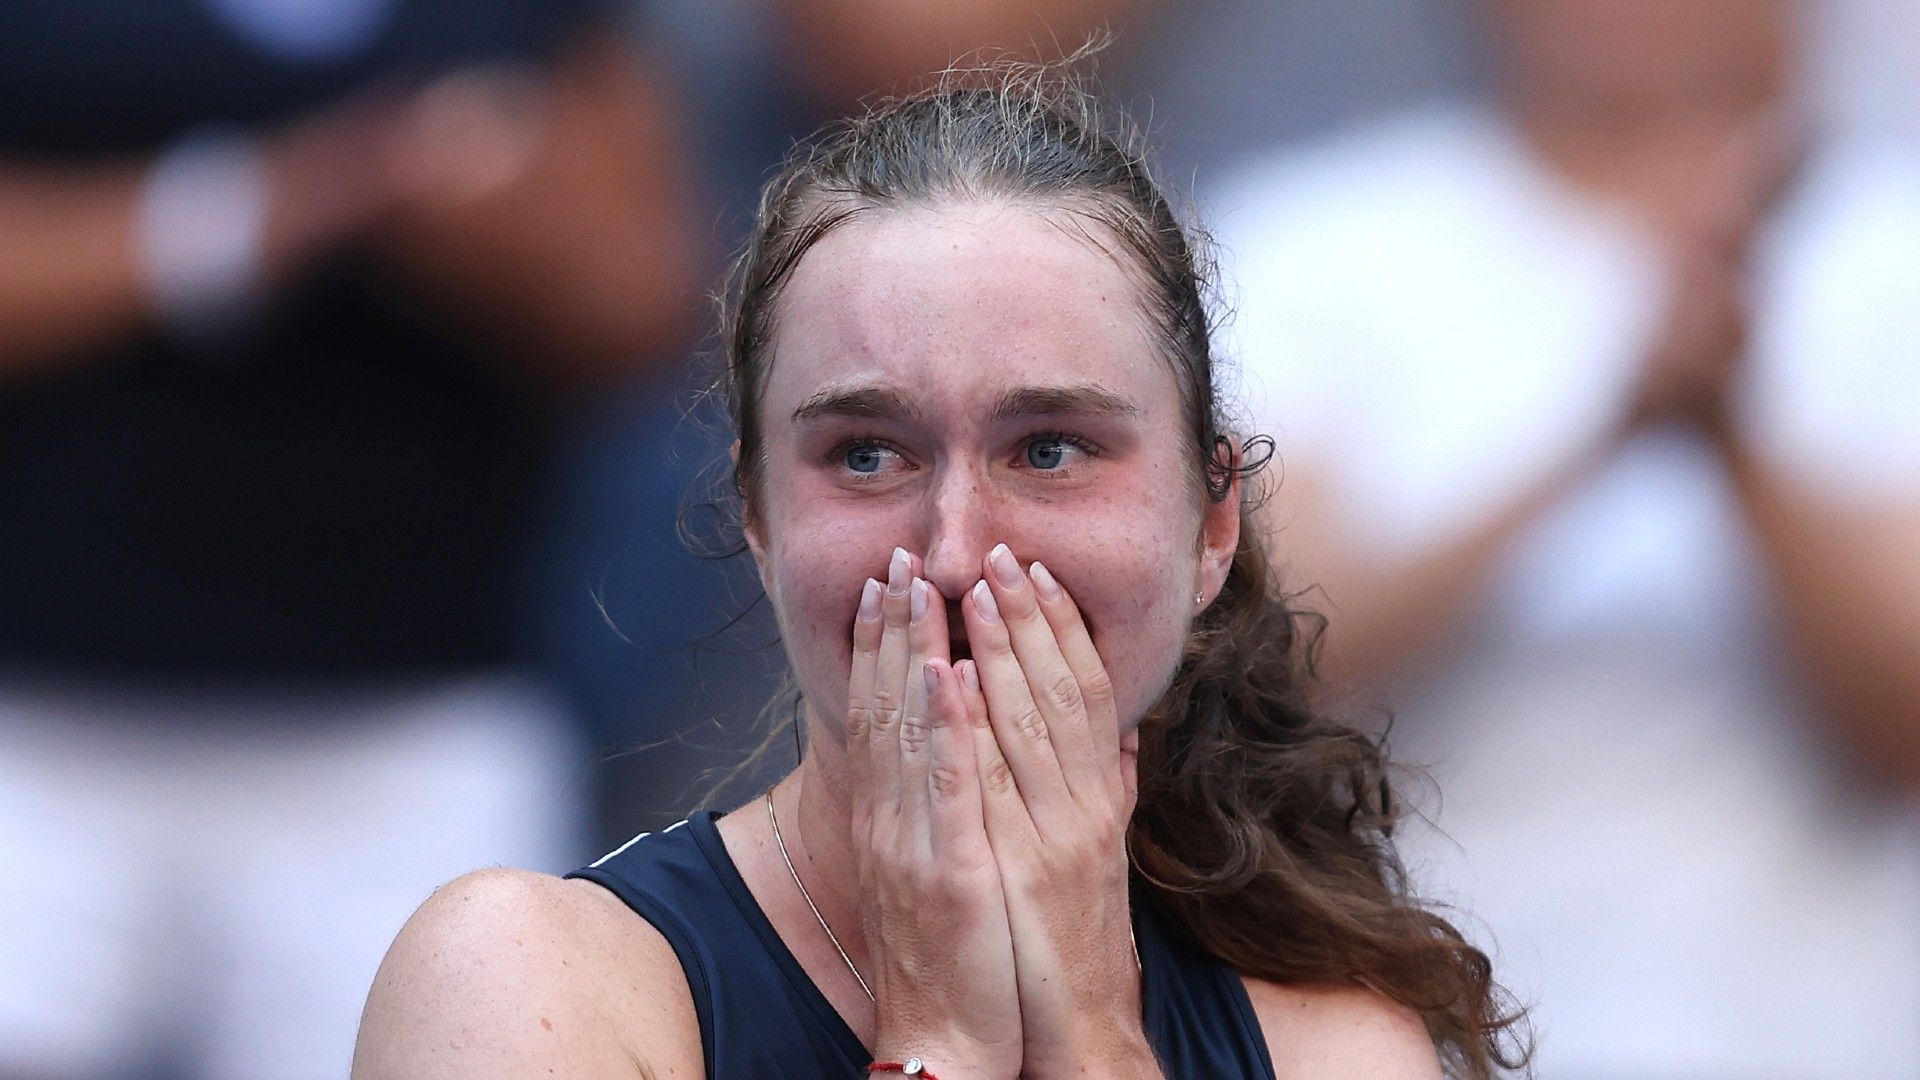 Ukrainian qualifier Snigur surprises by defeating Halep on opening day at US Open